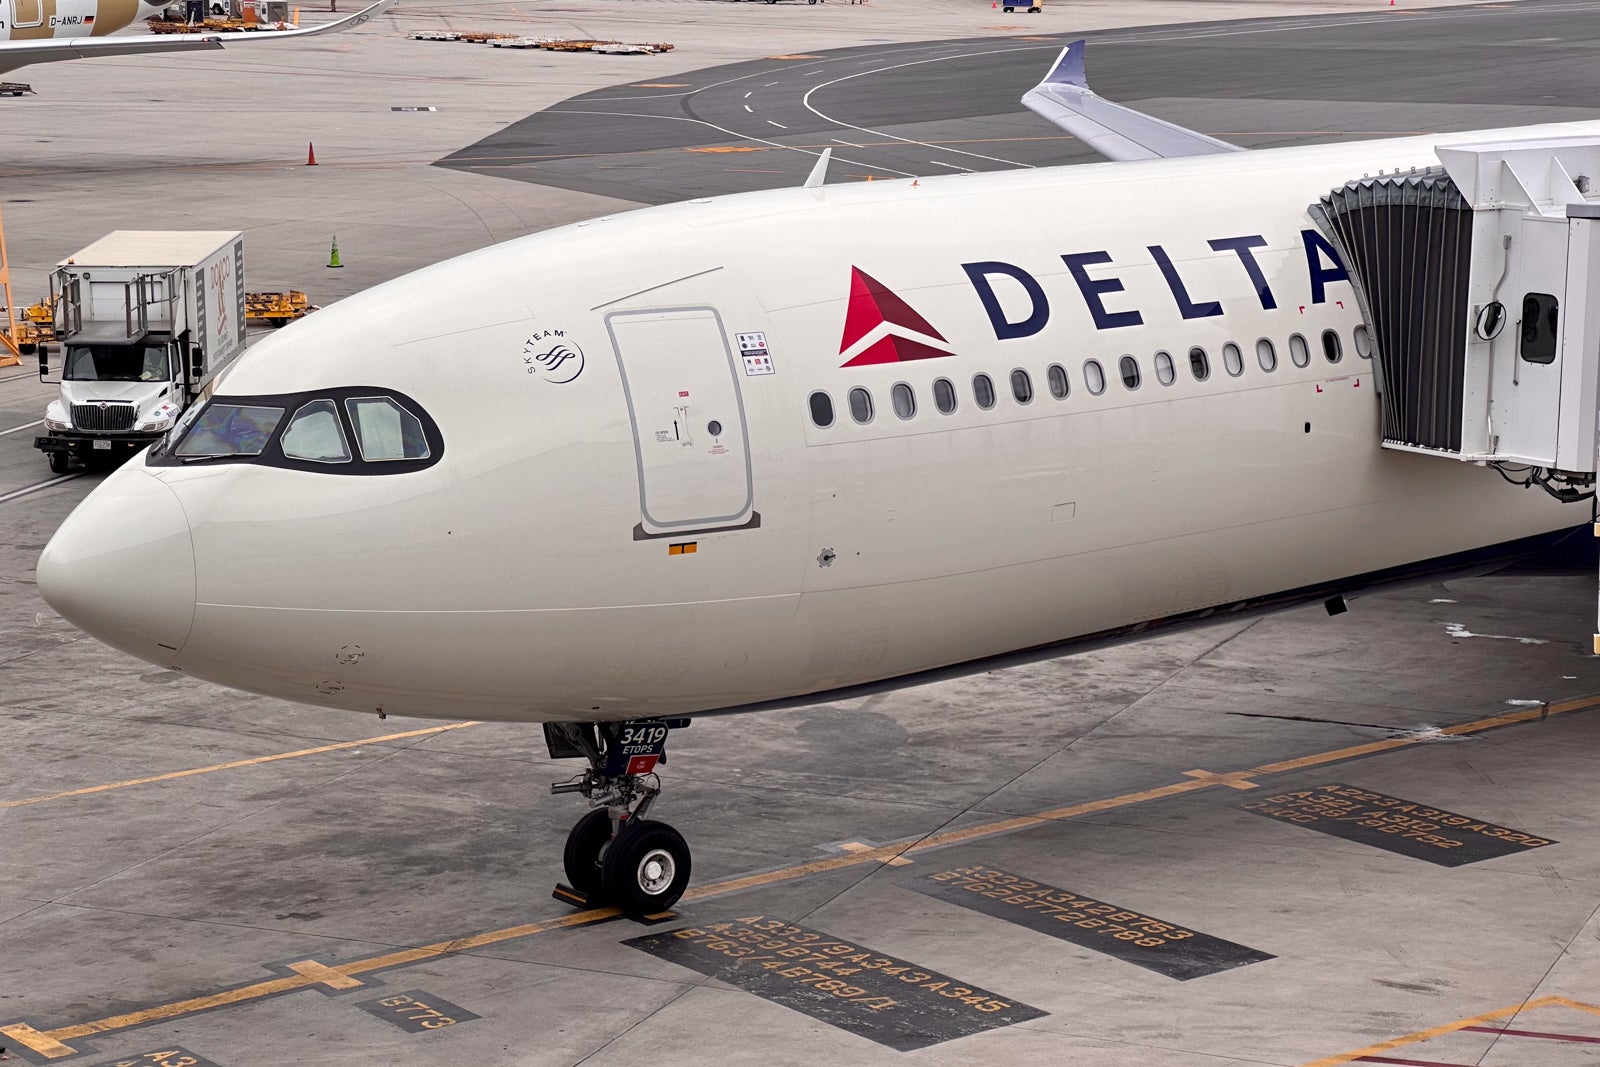 Delta adds new nonstop route from Orlando to London, 5 new short-haul flights